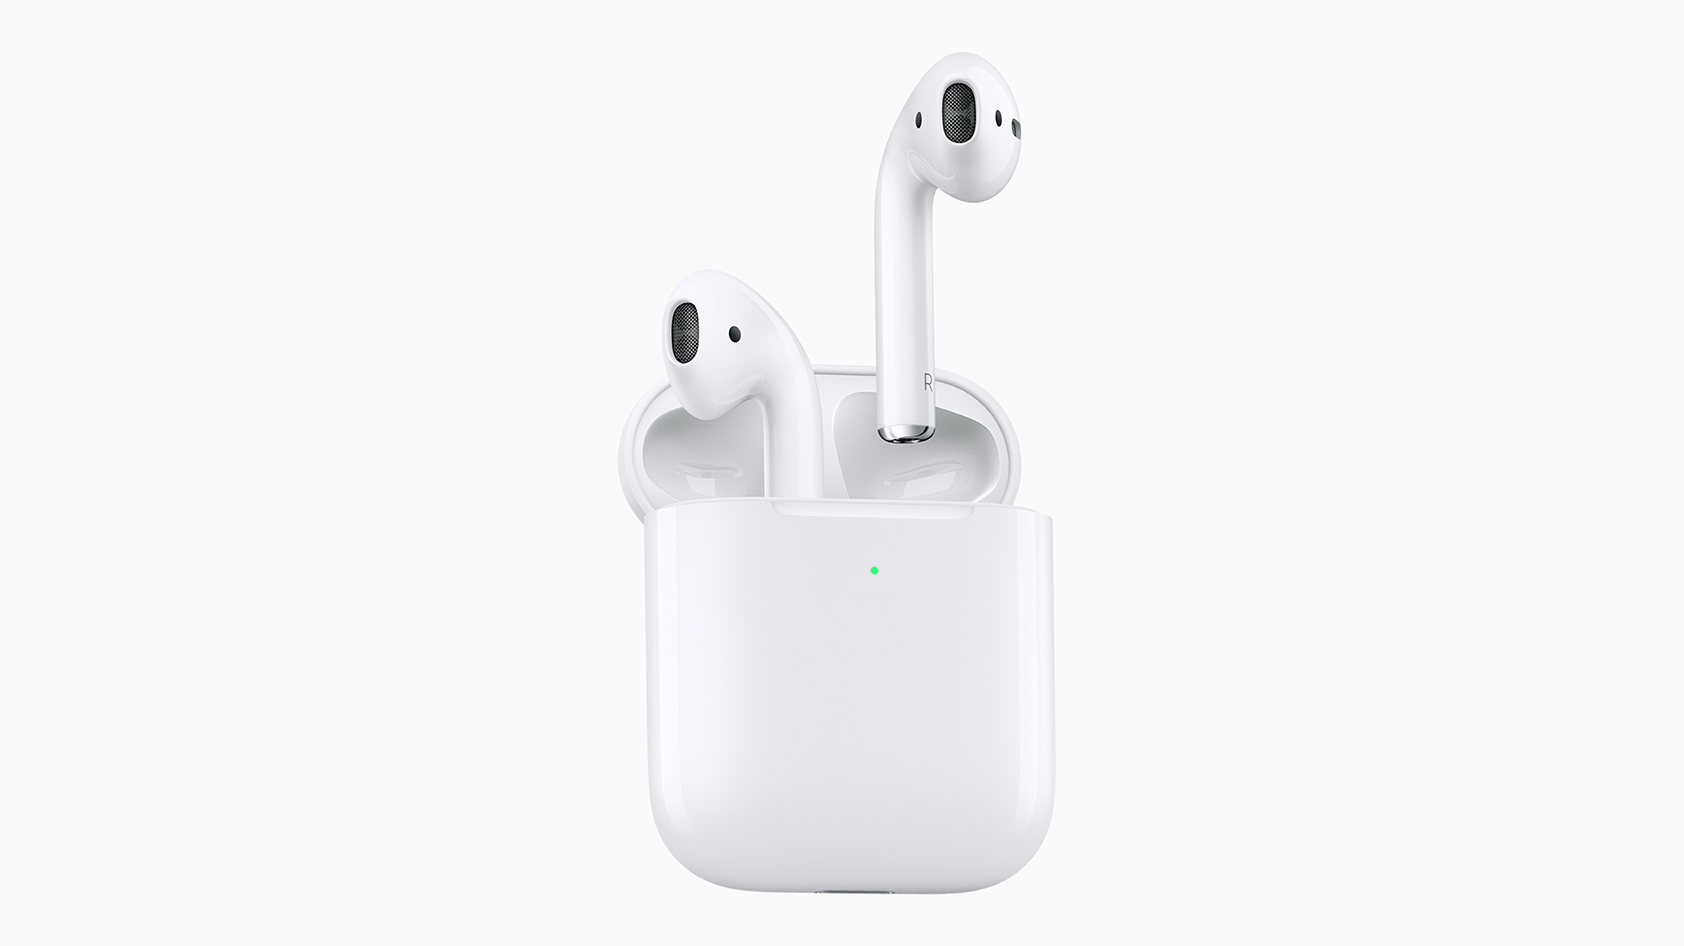 Product image of the second-generation AirPods coming out of the case against a white background.